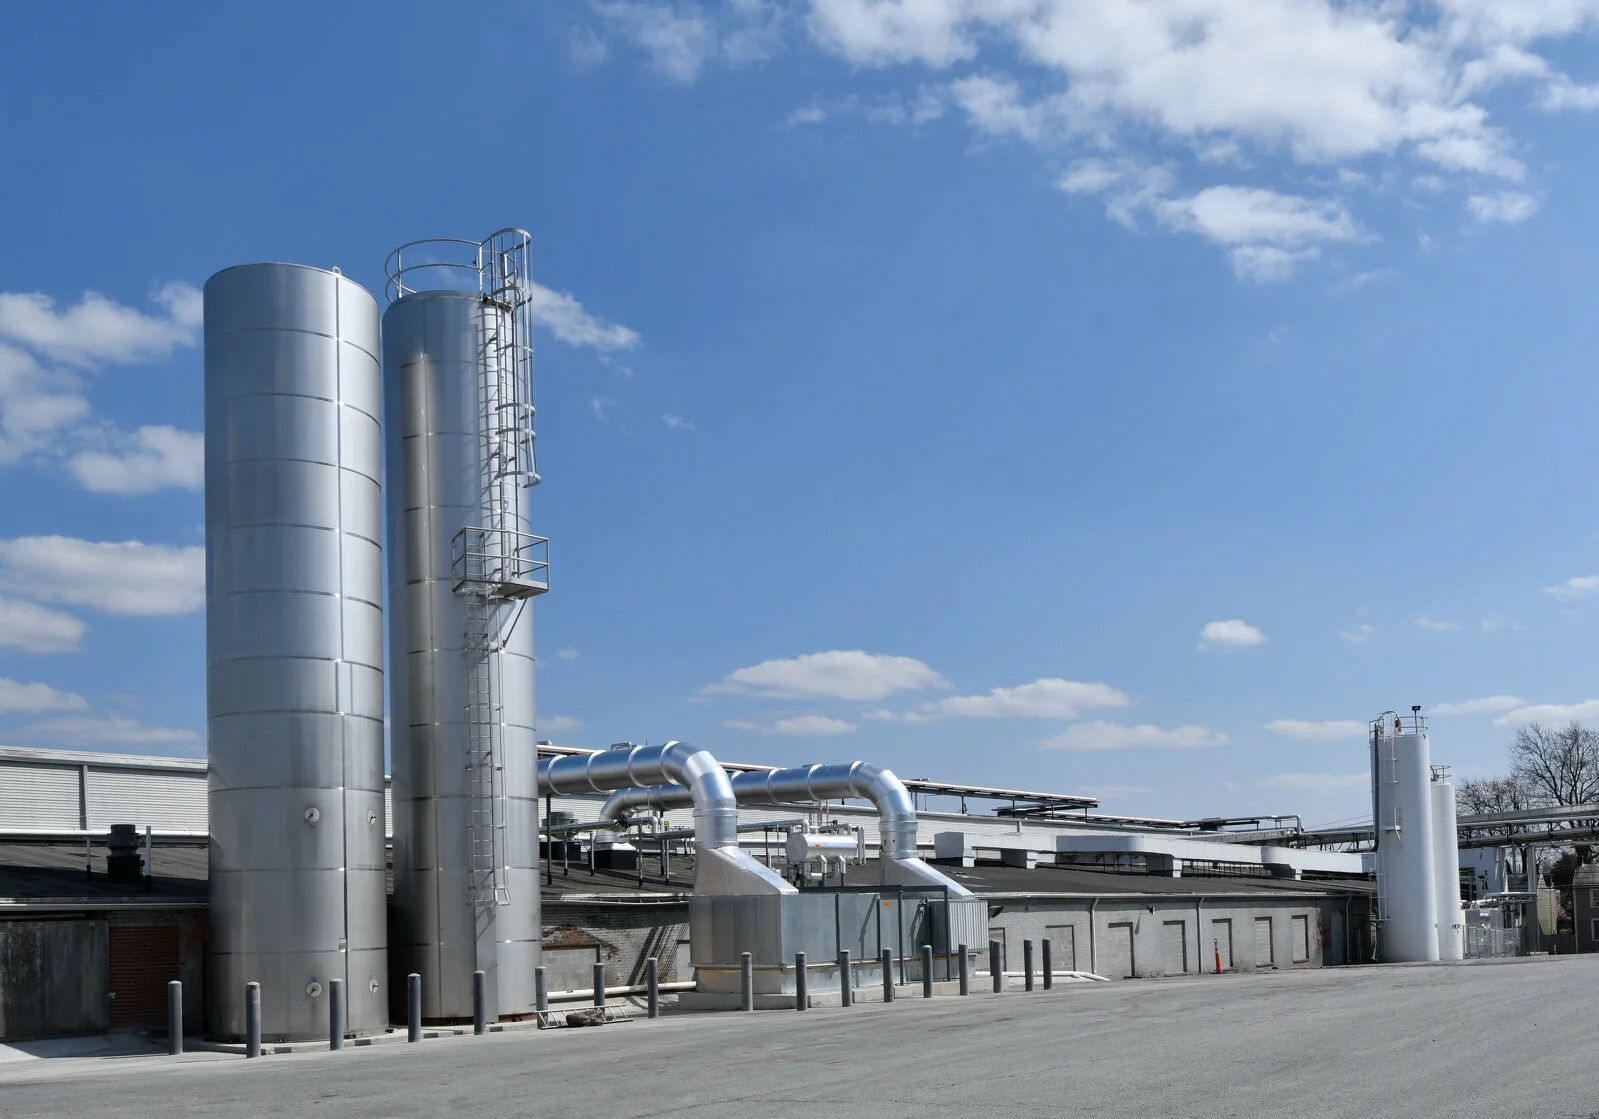 Exterior Dairy made facility, silver silos, large exterior vents, Photo taken on a sunny day with clouds.